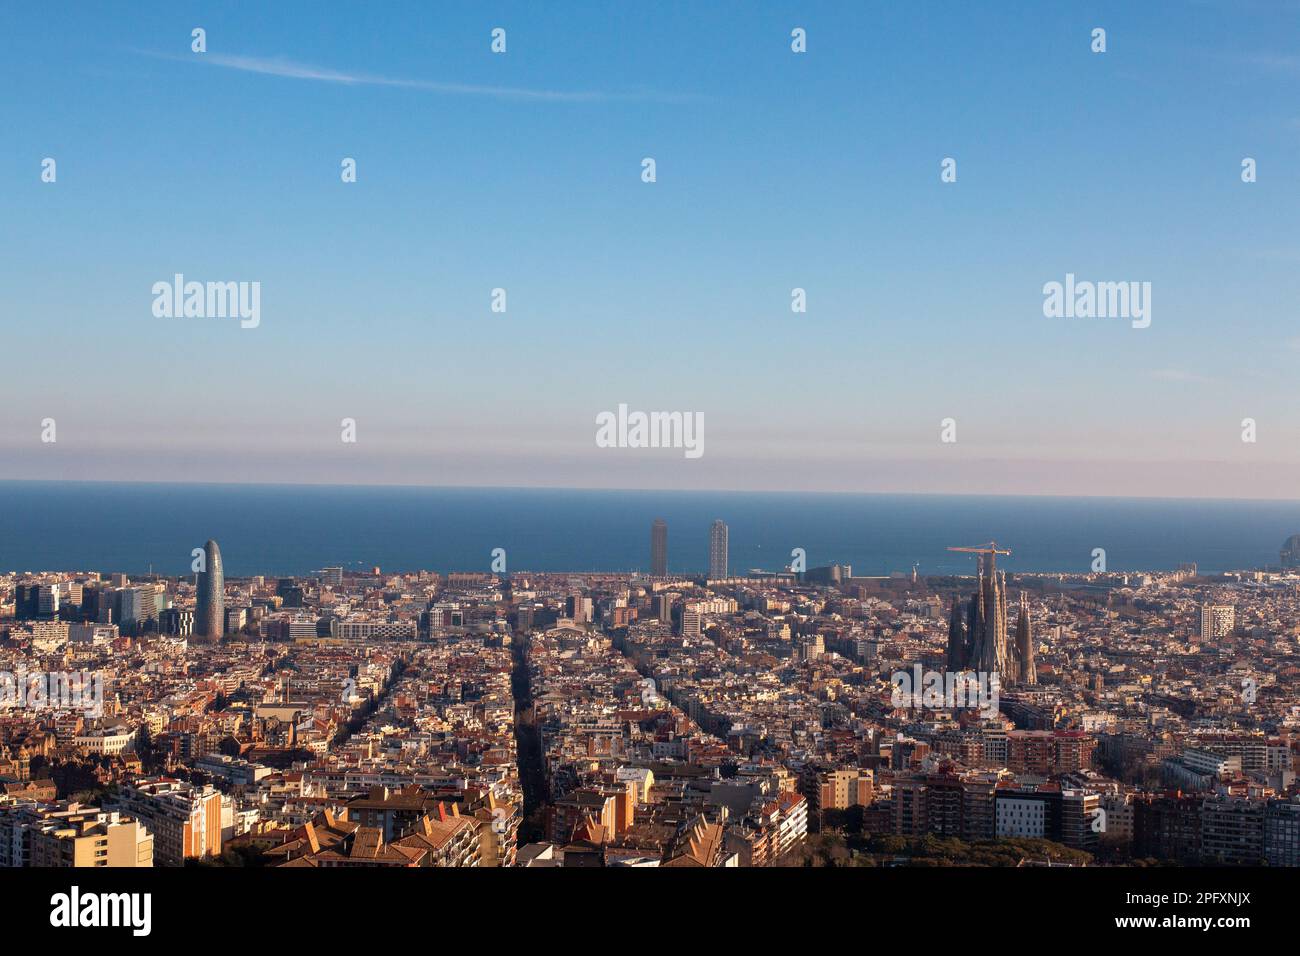 View of Barcelona, Spain from above,  with the ocean and clear blue skies in the background. Stock Photo